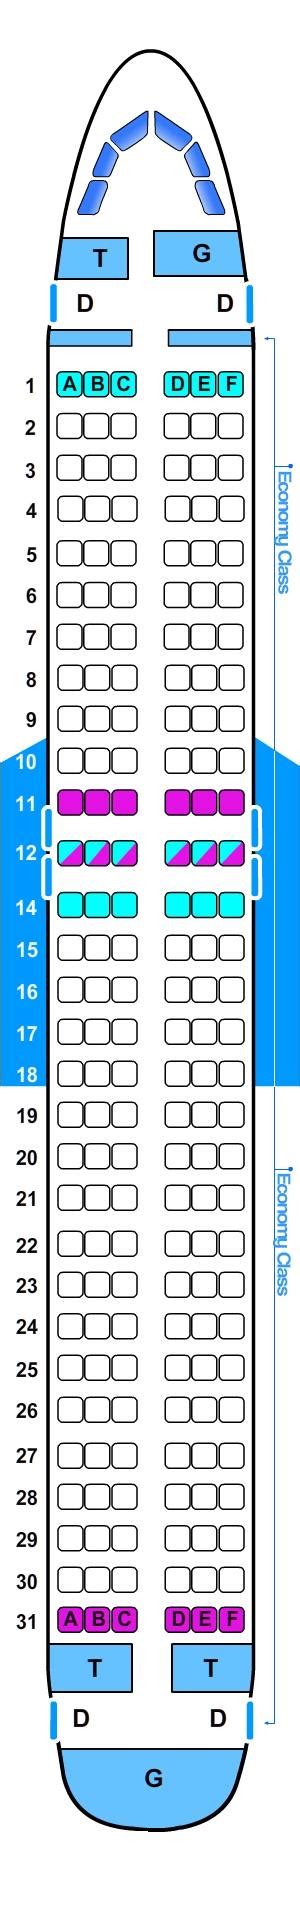 Seat Map Airbus A Neo Qatar Airways Best Seats In The Plane